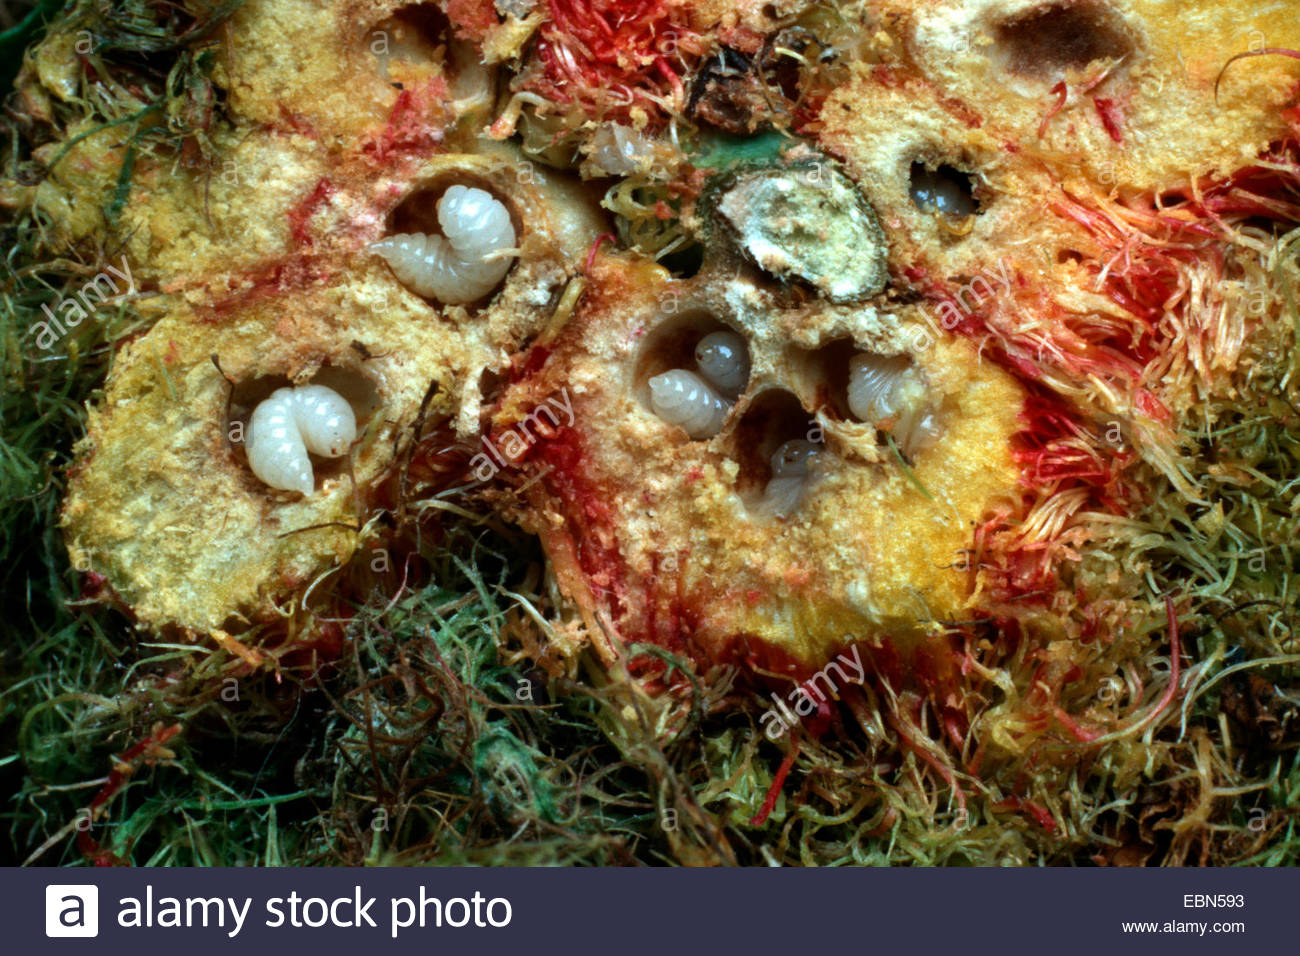 mossy rose gall wasp, bedeguar gall wasp (Diplolepis rosae, Rhodites  rosae), larvae in a sliced gall